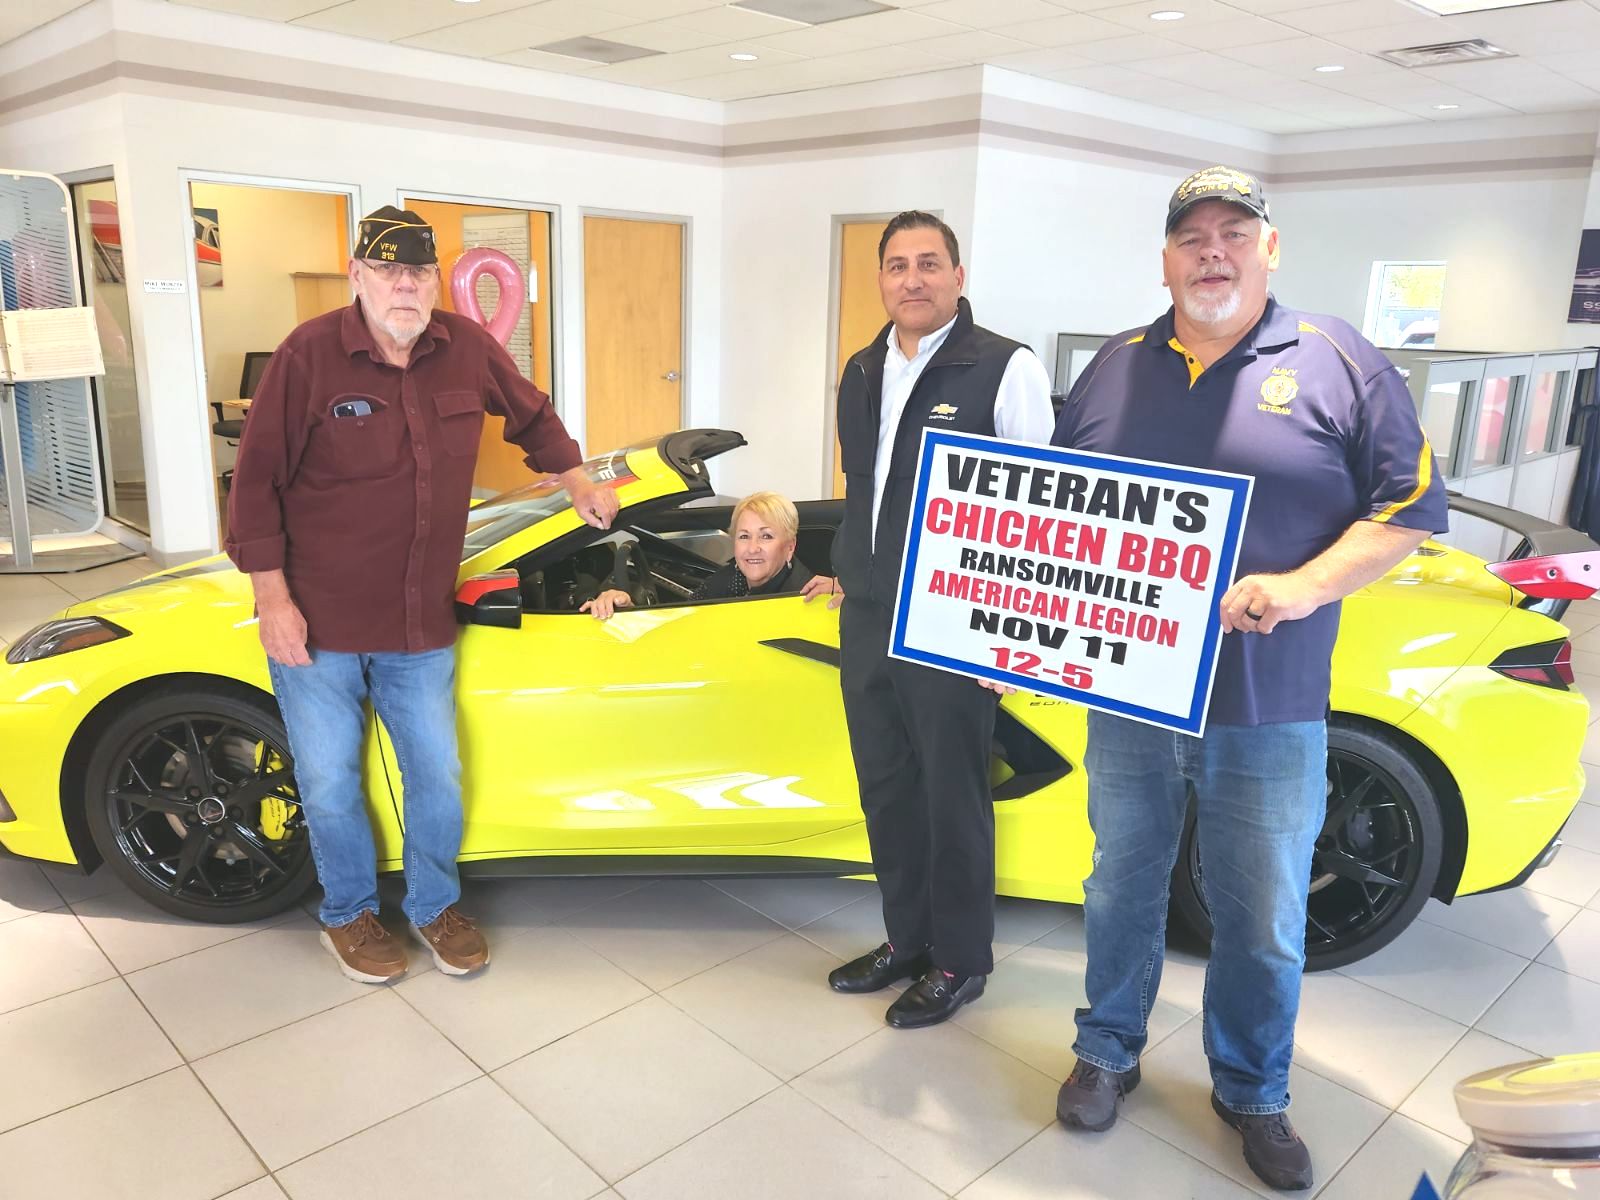 First District Niagara County Legislator Irene Myers is pictured in a 2023 Chevy Corvette at the Ransomville KiPo dealership. Joining her are Cmdr. Ed Jackson of Youngstown VFW Post 313 and Cmdr. Rick Newman of the Ransomville American Legion Post. (Submitted photo)